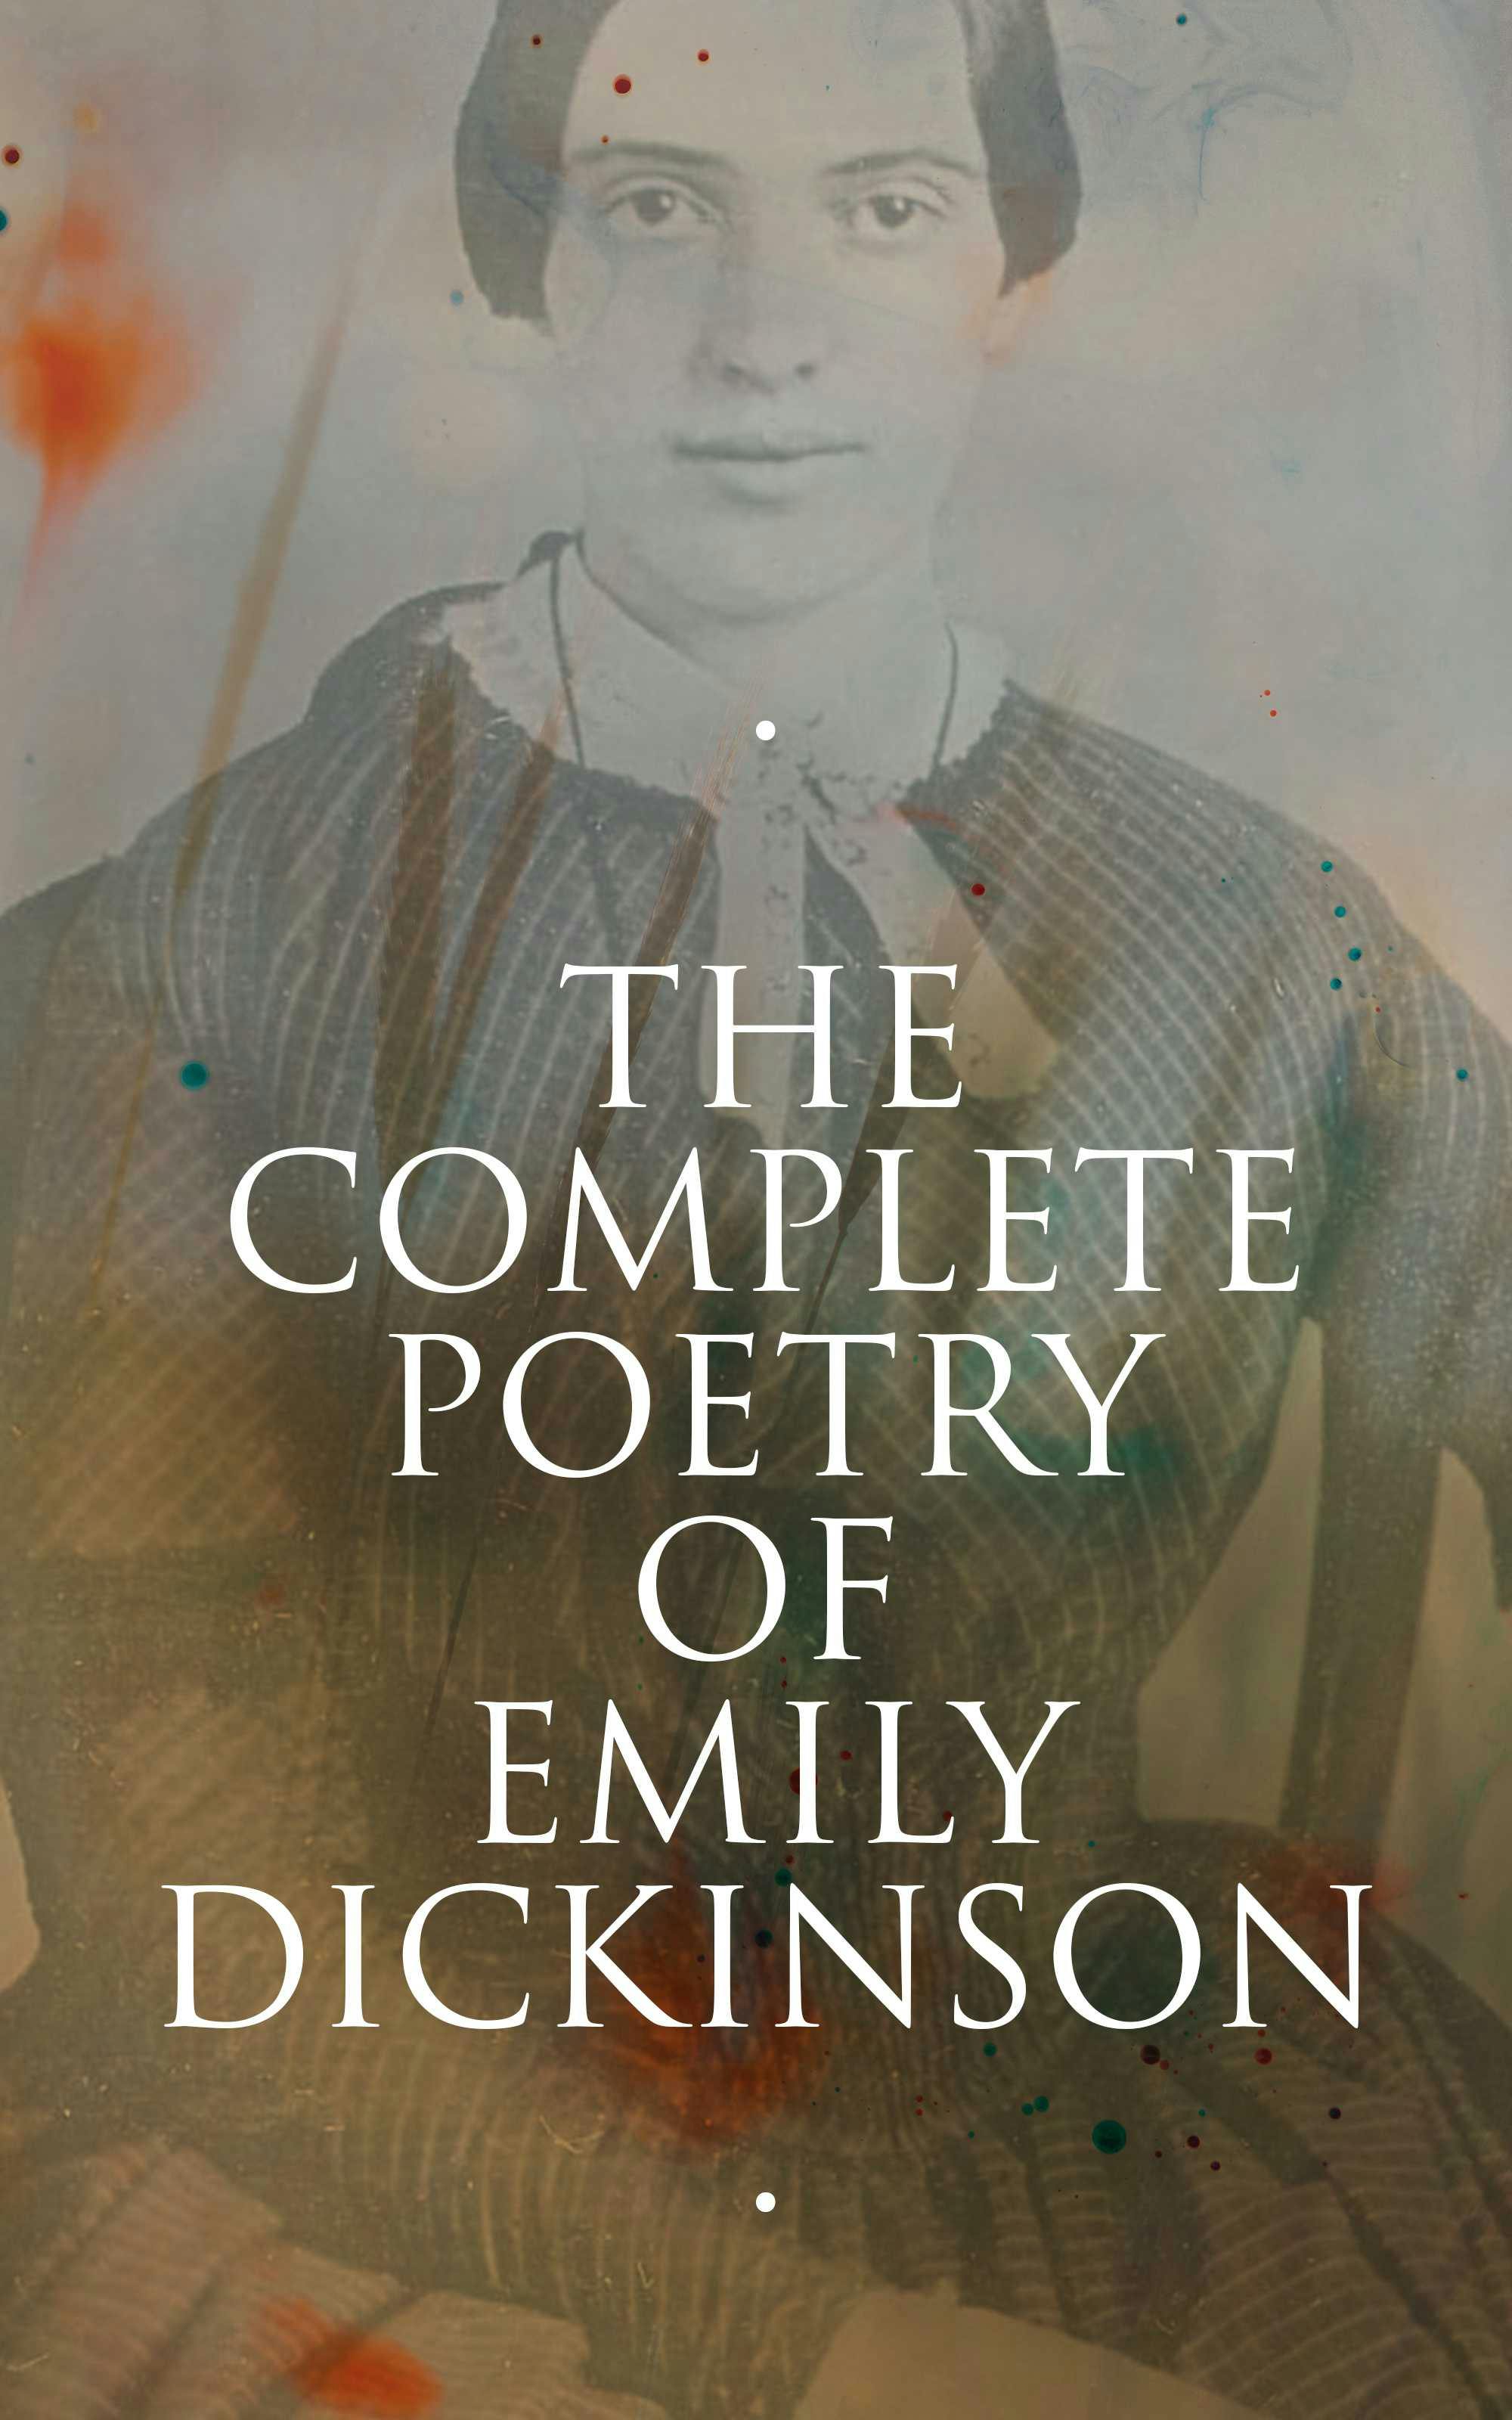 The Complete Poetry of Emily Dickinson: 580+ Poems, Verses and Lines, With Biography & Letters: I'm Nobody, Success, Hope, The Single Hound… - Emily Dickinson